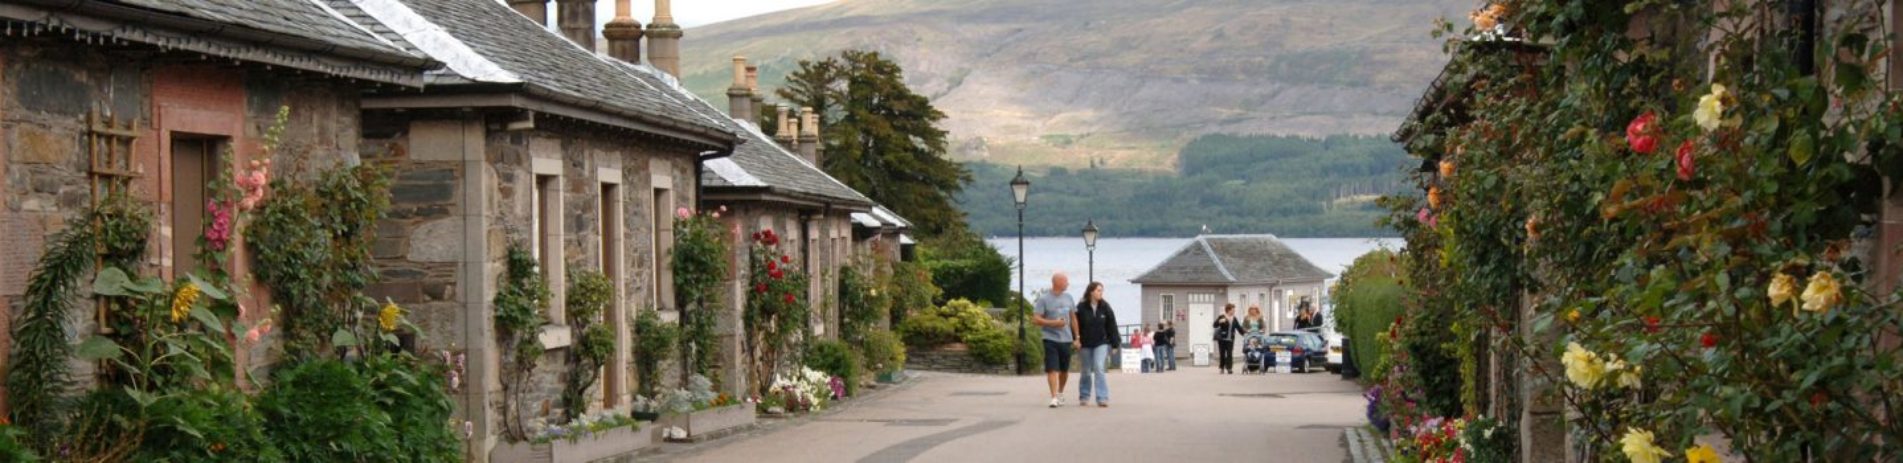 pier-road-in-luss-village-pretty-small-slate-houses-with-ivy-and-flowers-on-walls